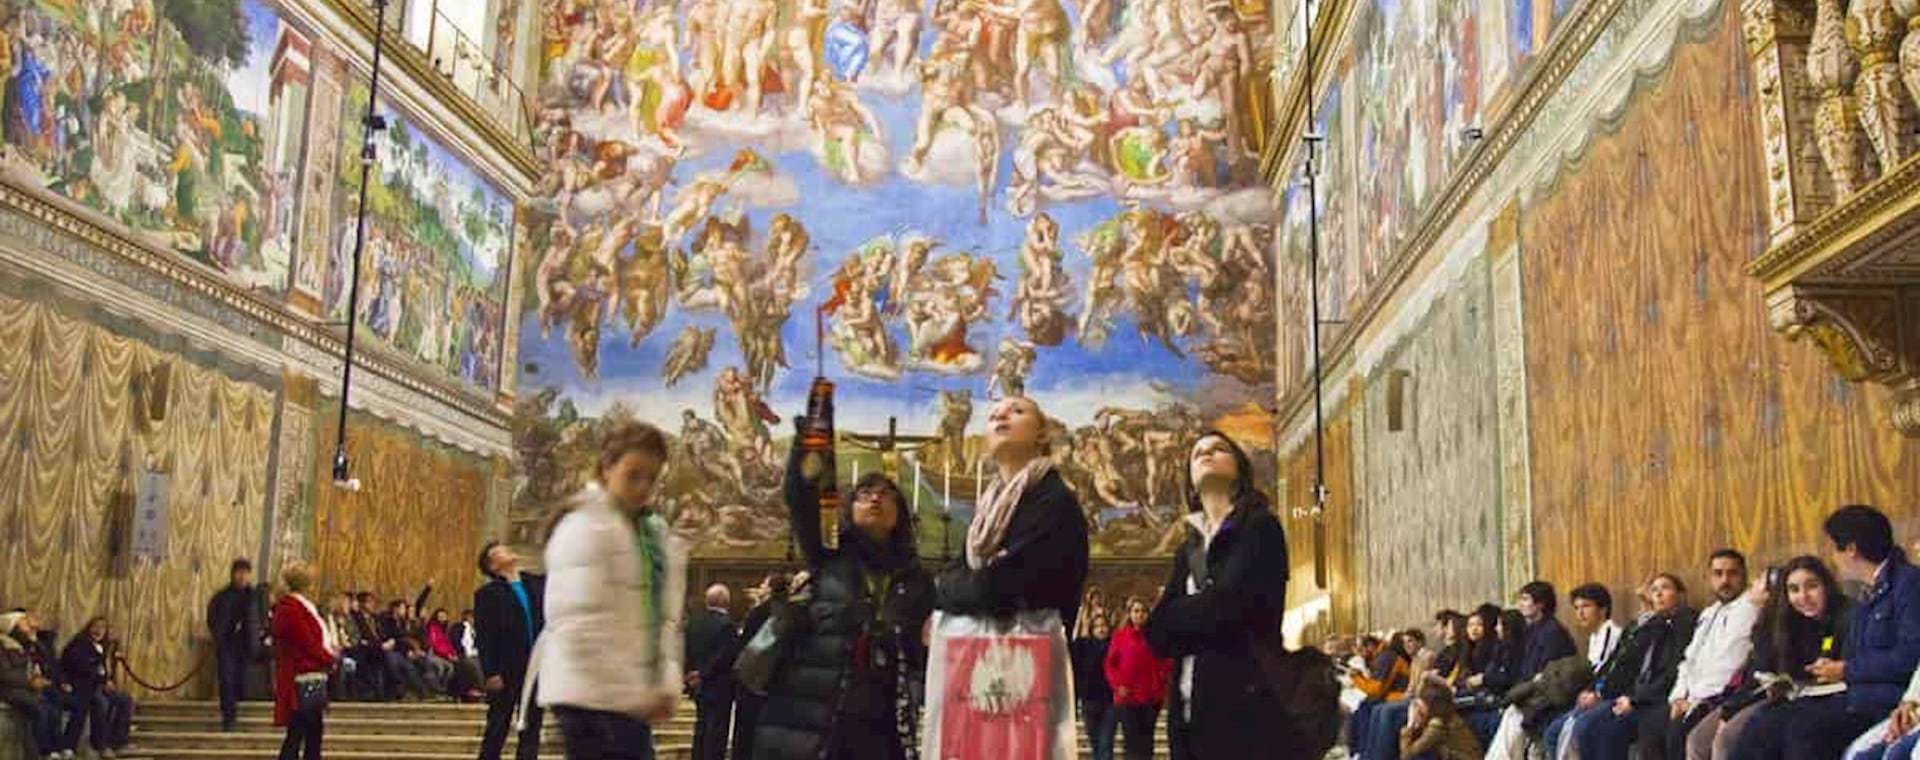 Tourists visiting the Sistine Chapel